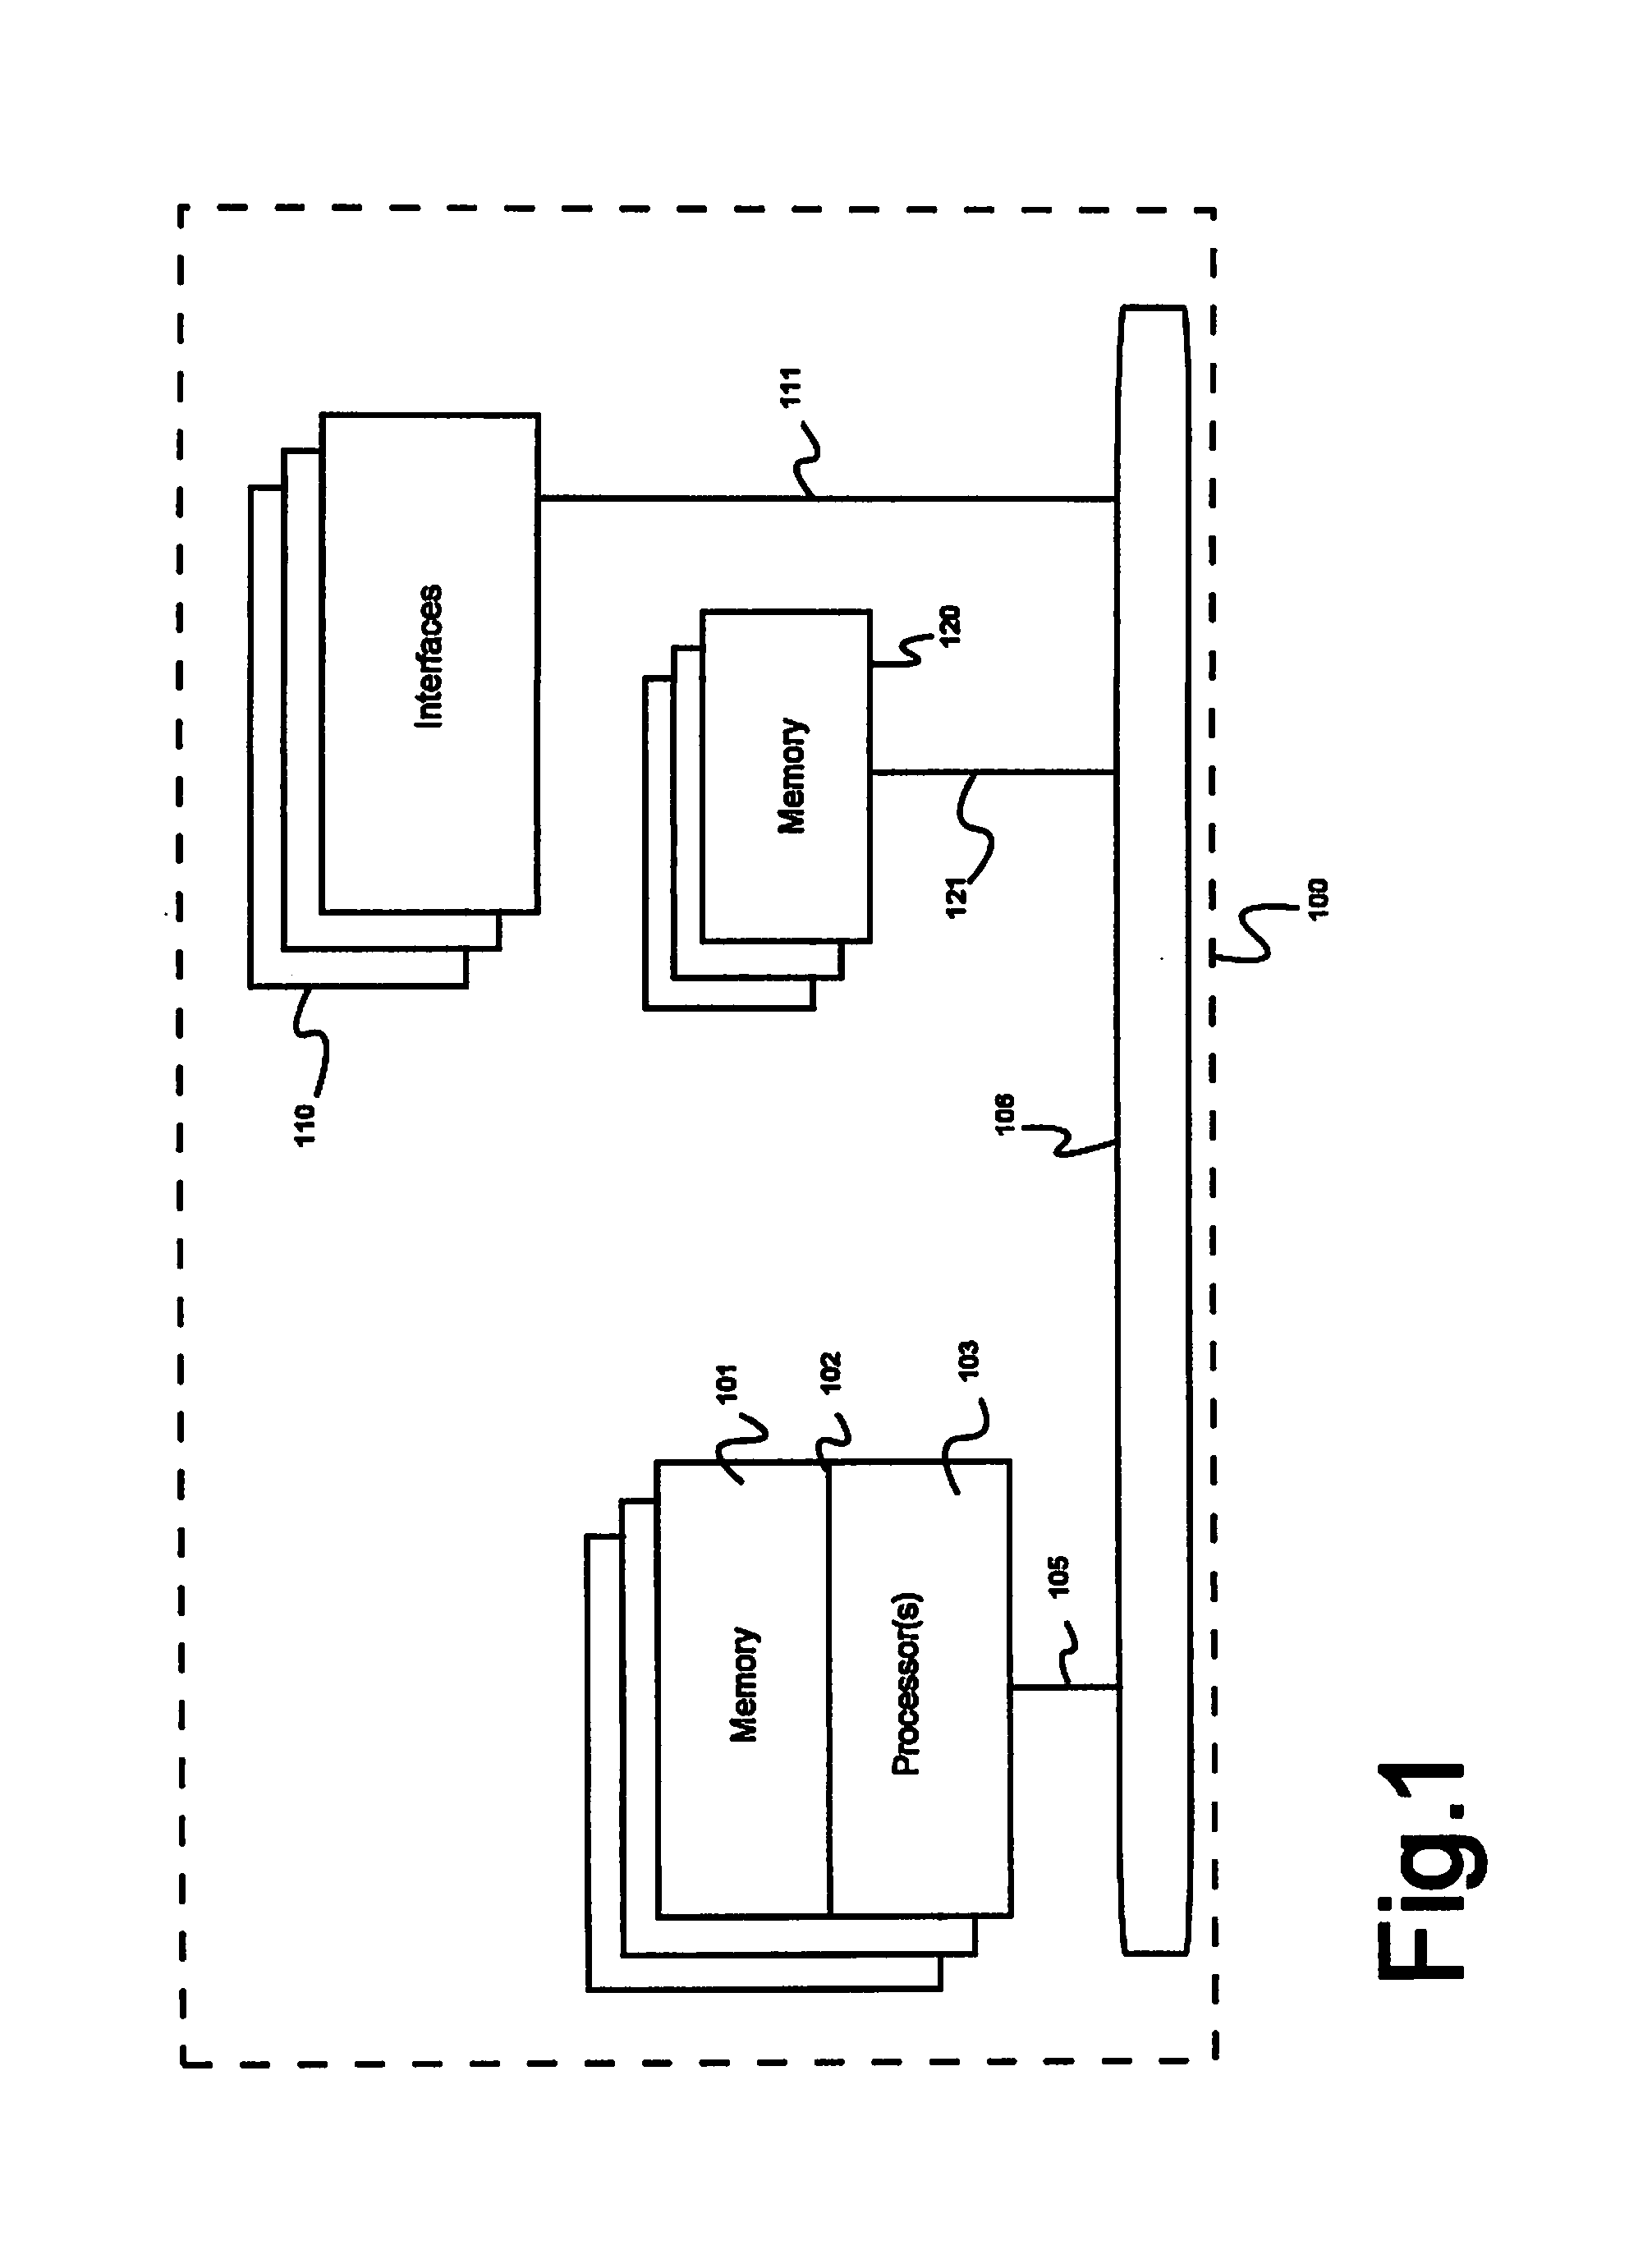 System and methods for automated testing of functionally complex systems